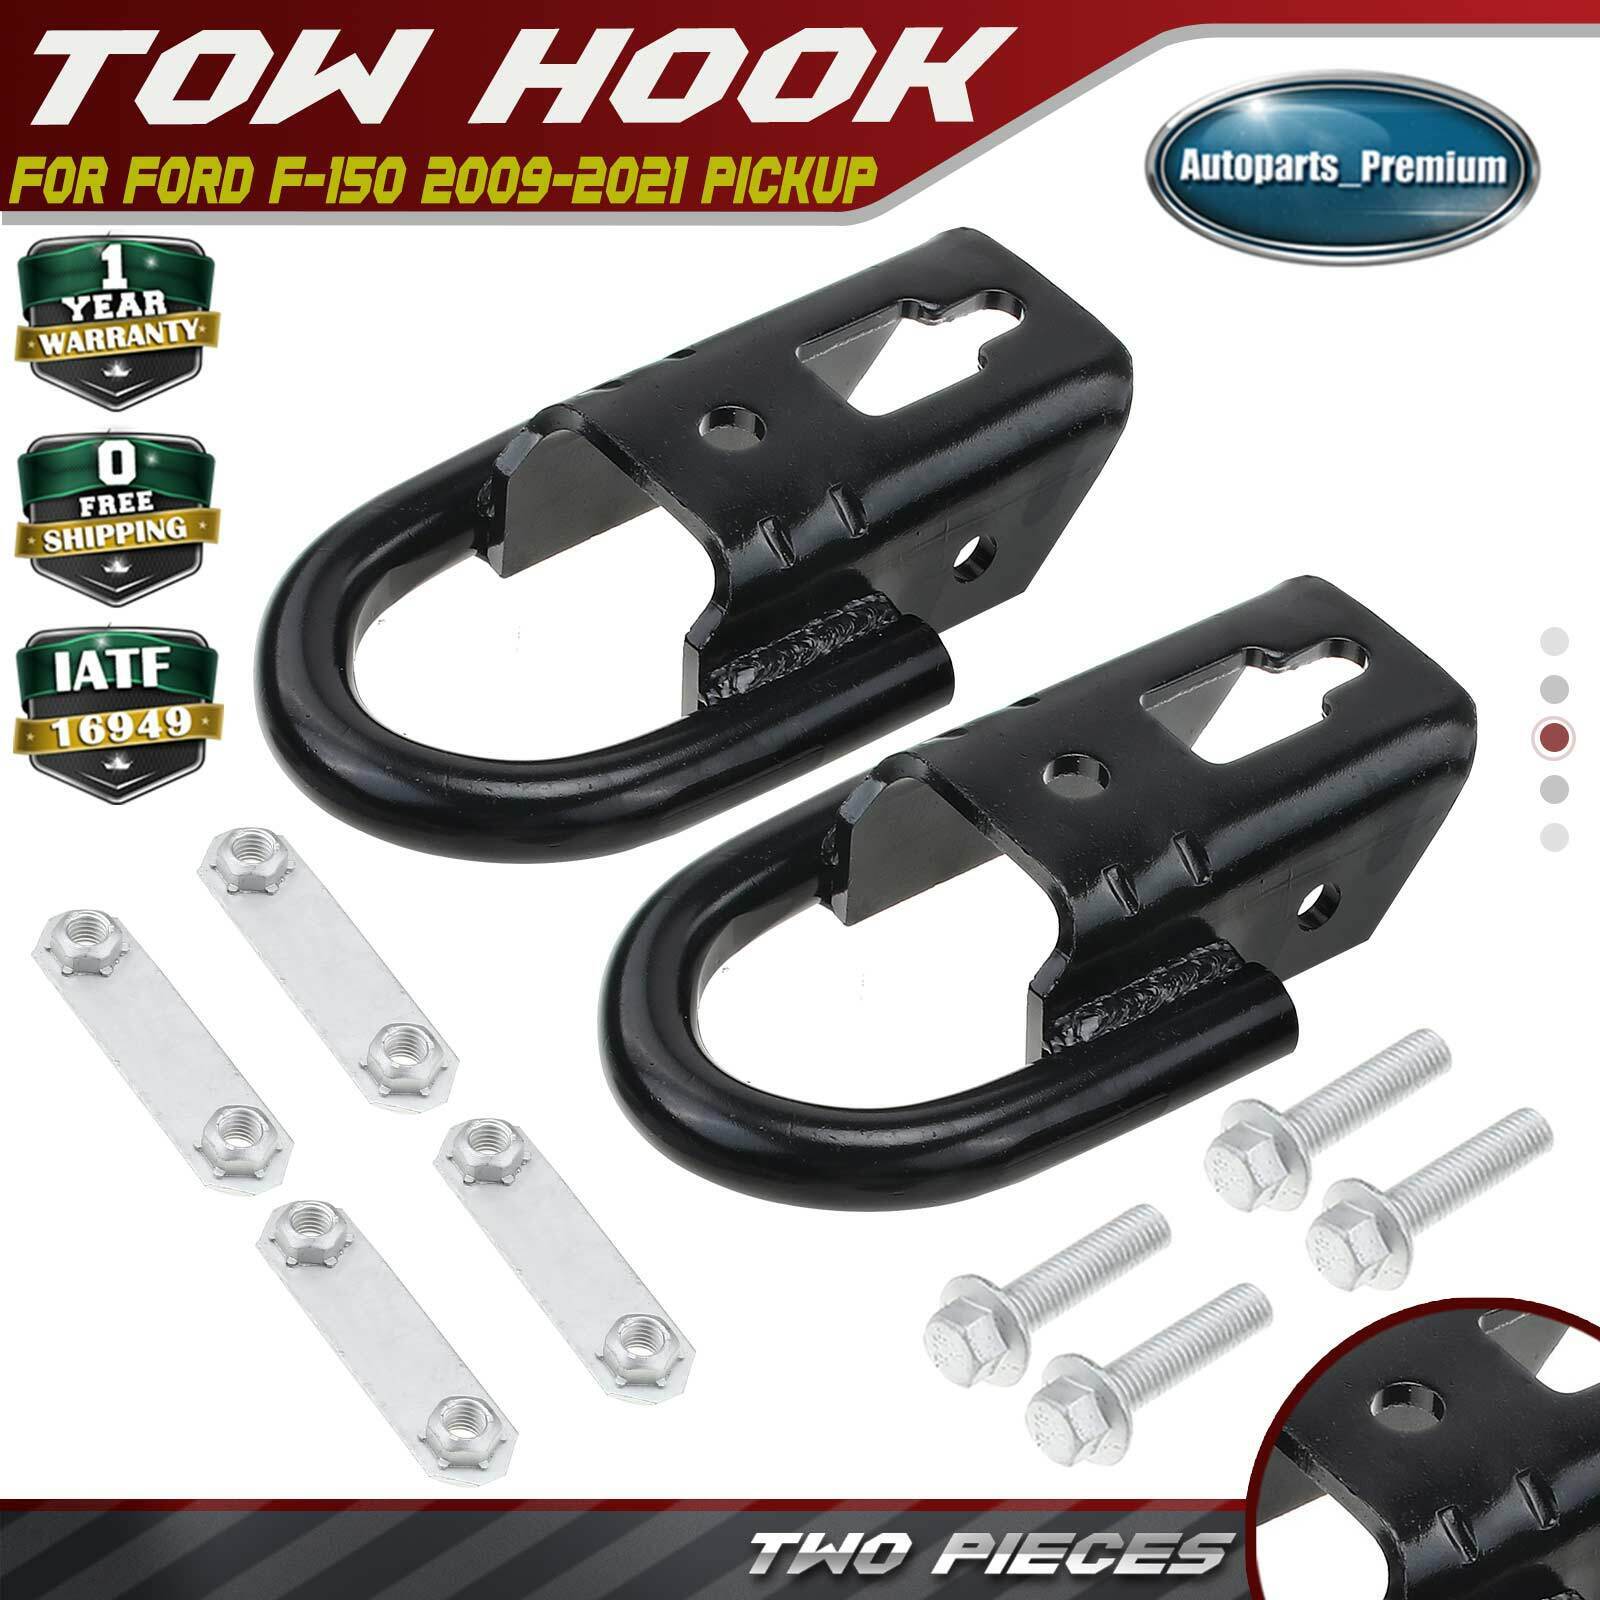 Front Pair (2) Black Tow Hooks w/ Hardware for Ford F-150 2009-2021 Cab Pickup